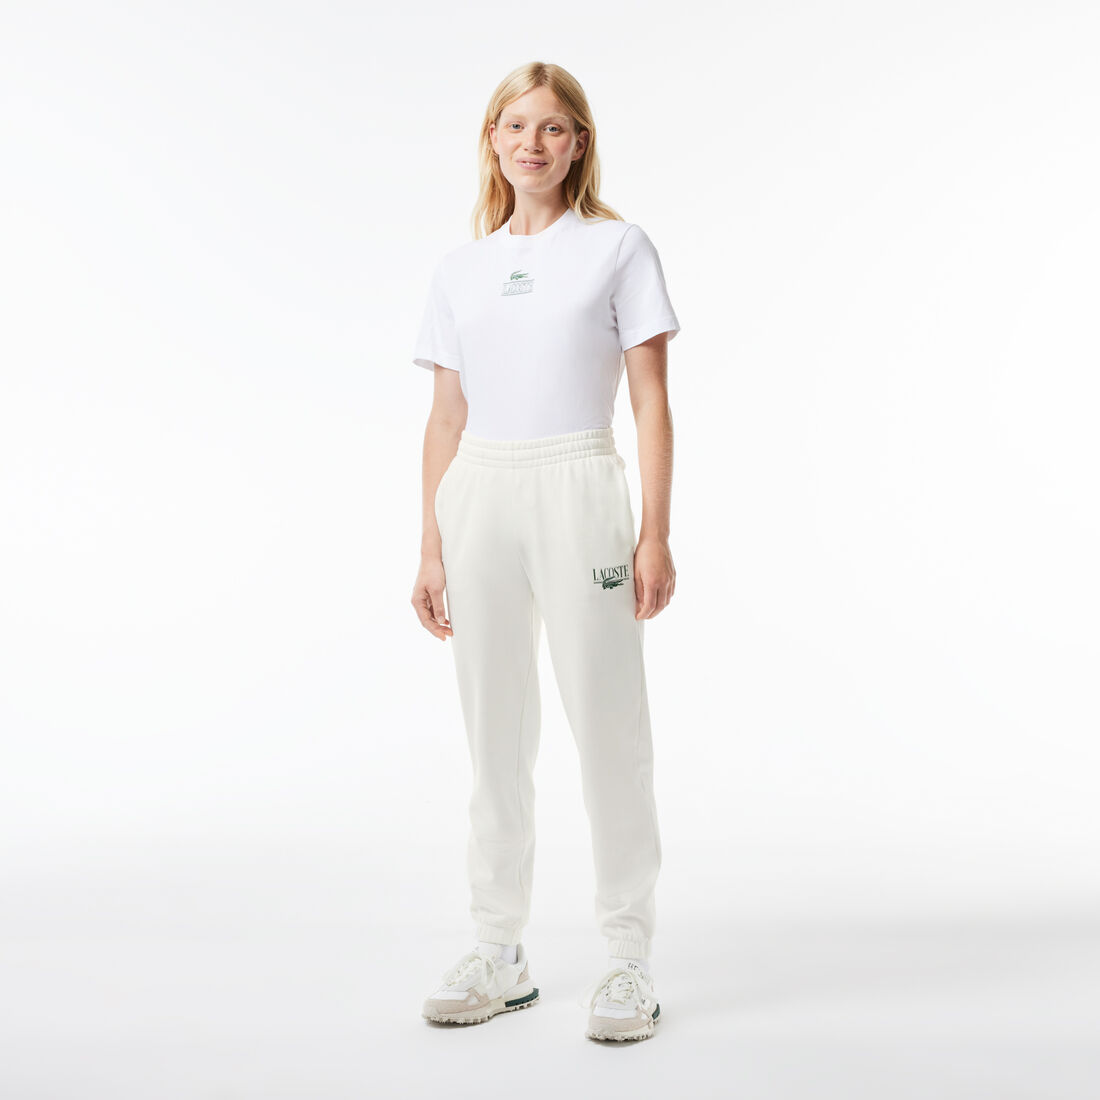 Lacoste Printed Jogger Track Pants - XF1710-00-70V